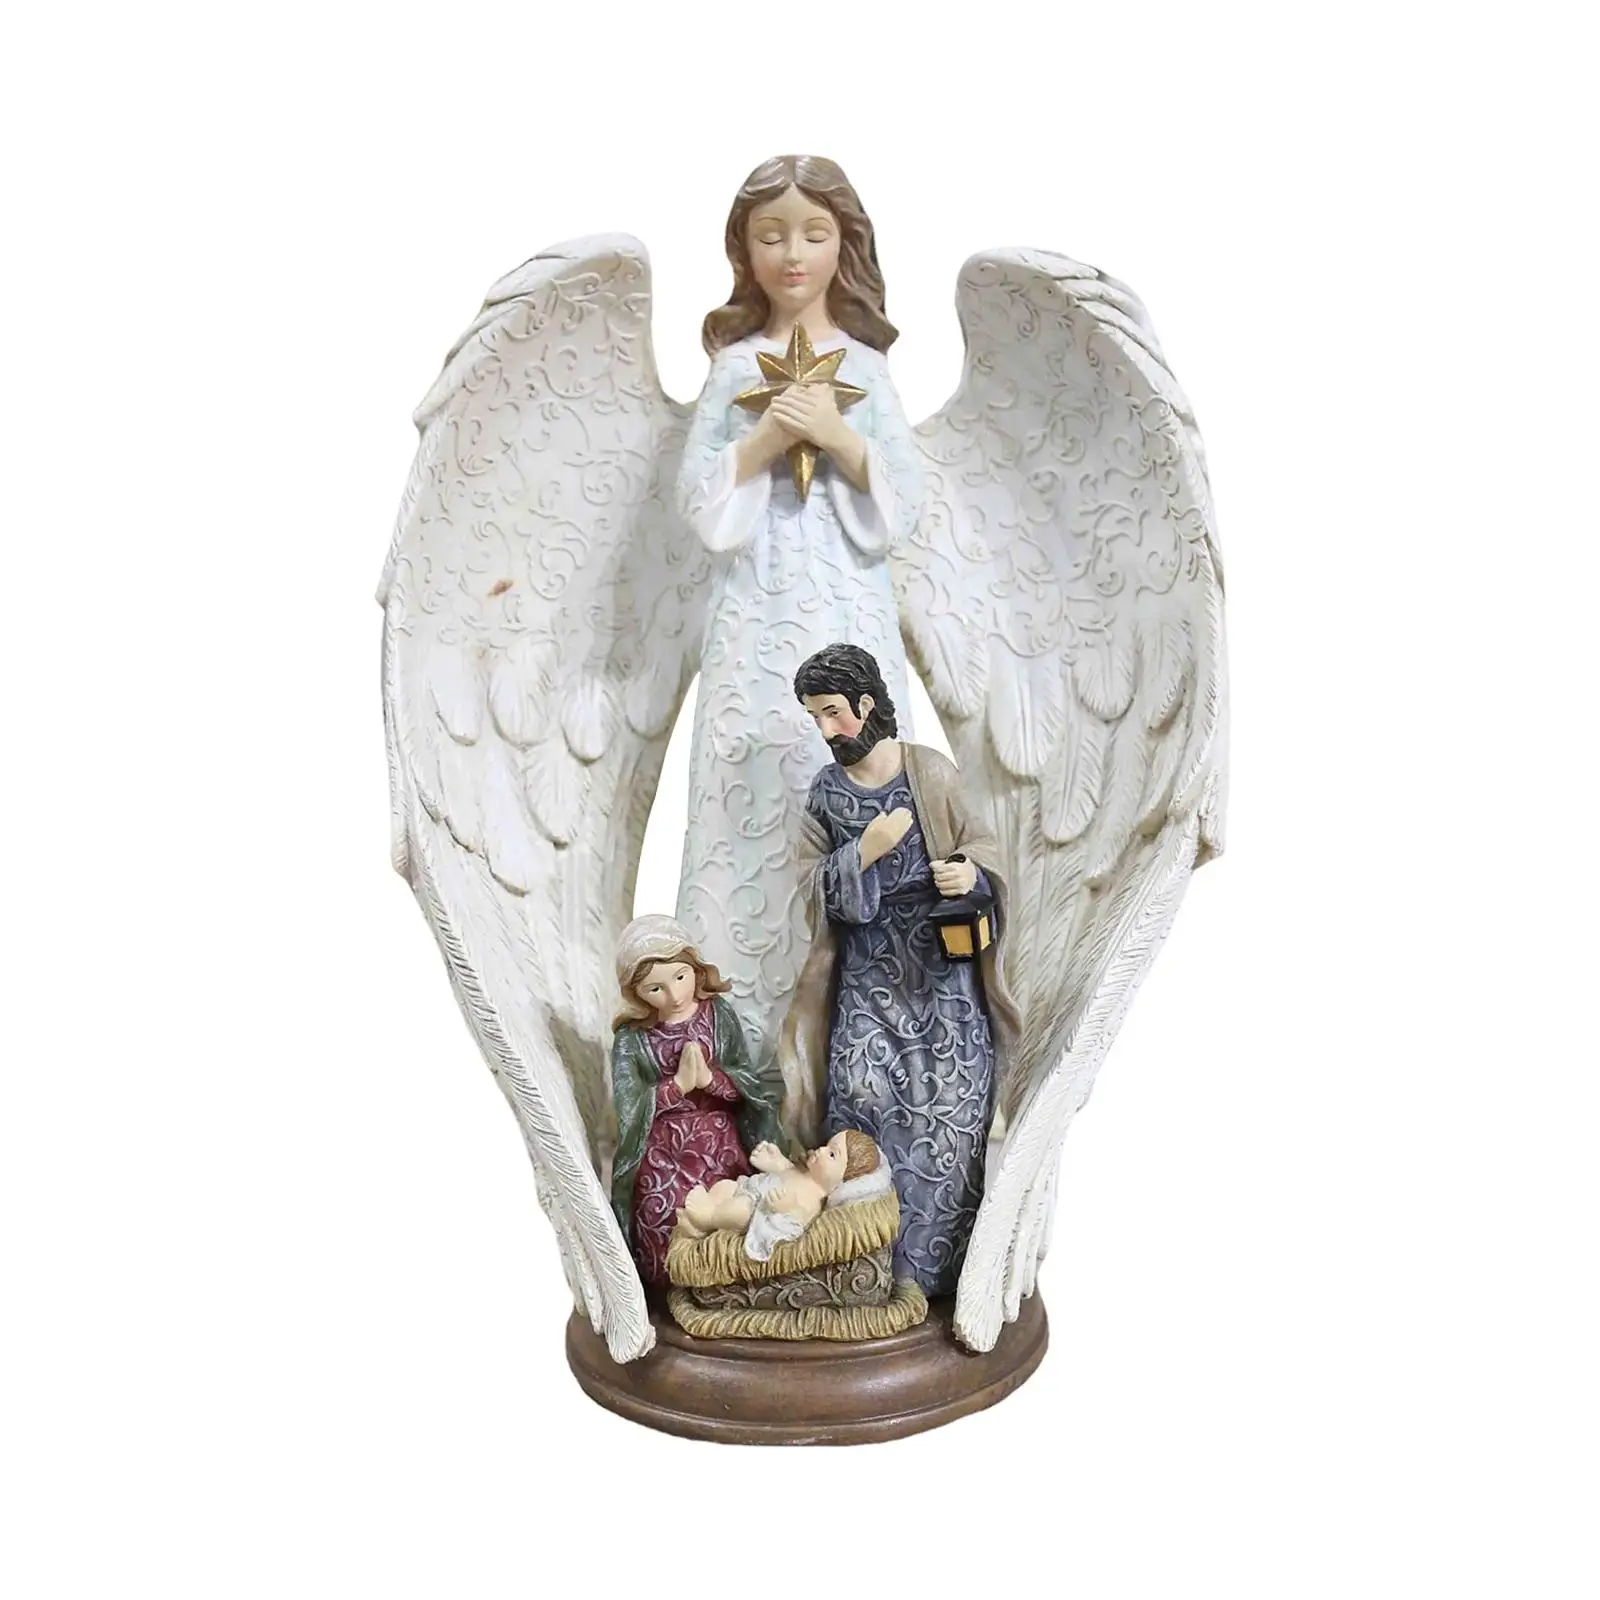 Holy Family Statue Collectible Art Crafts Religious Jesus Figure Resin Sculpture for Church Bedroom Tabletop Wedding Decoration